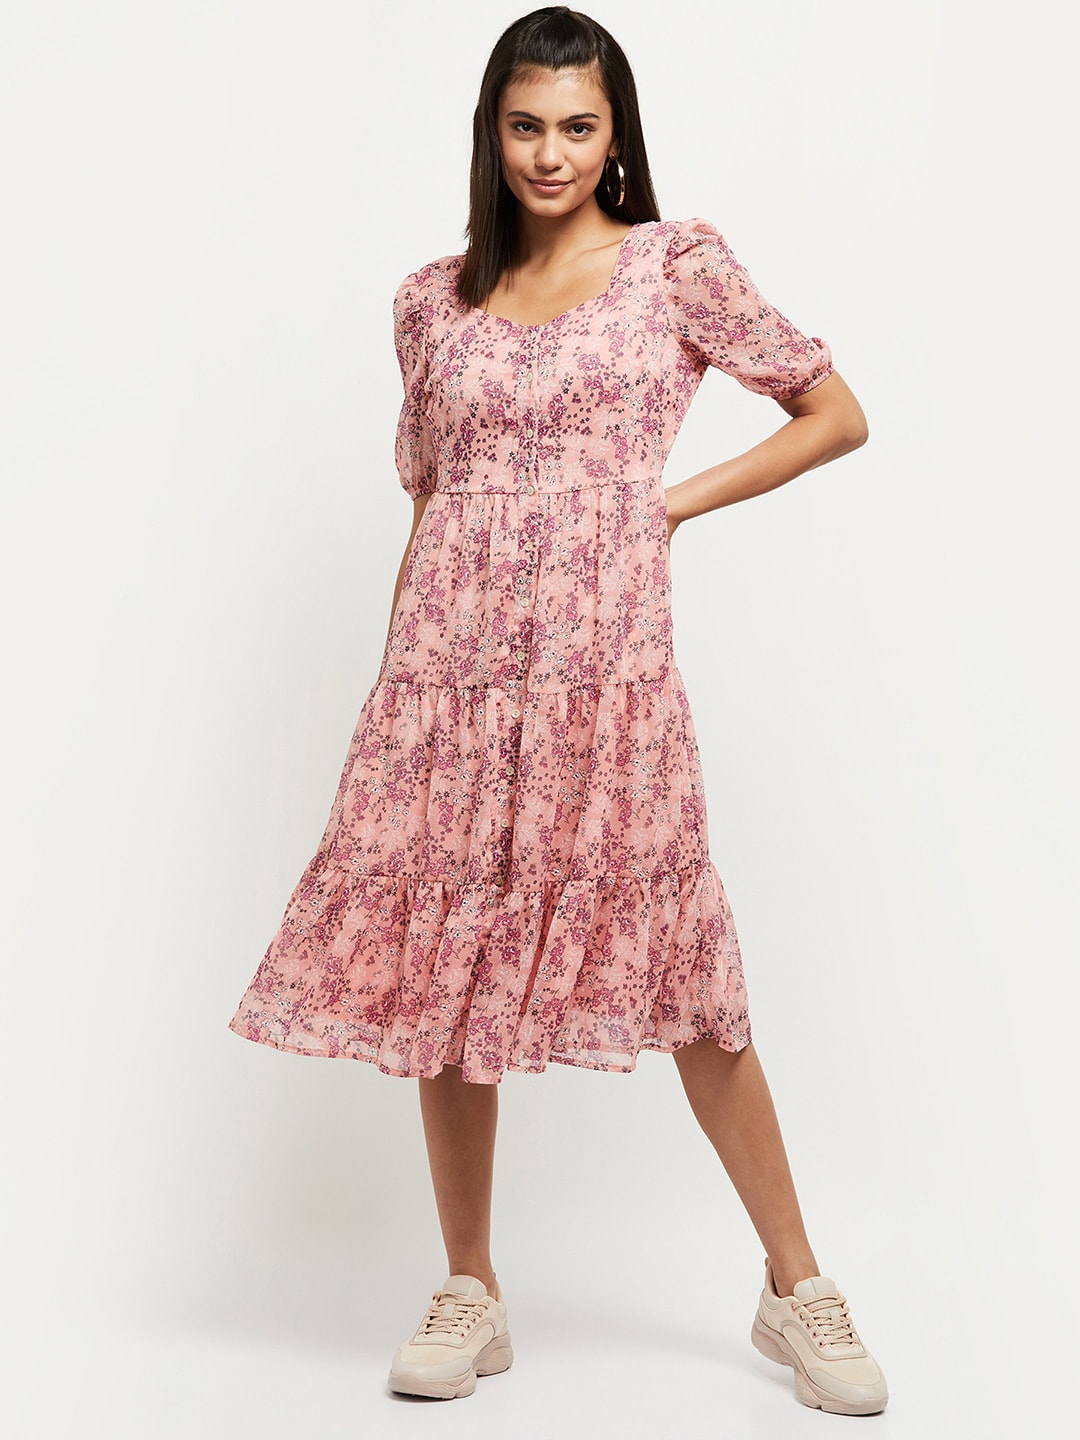 max Women Pink Floral A-Line Dress Price in India